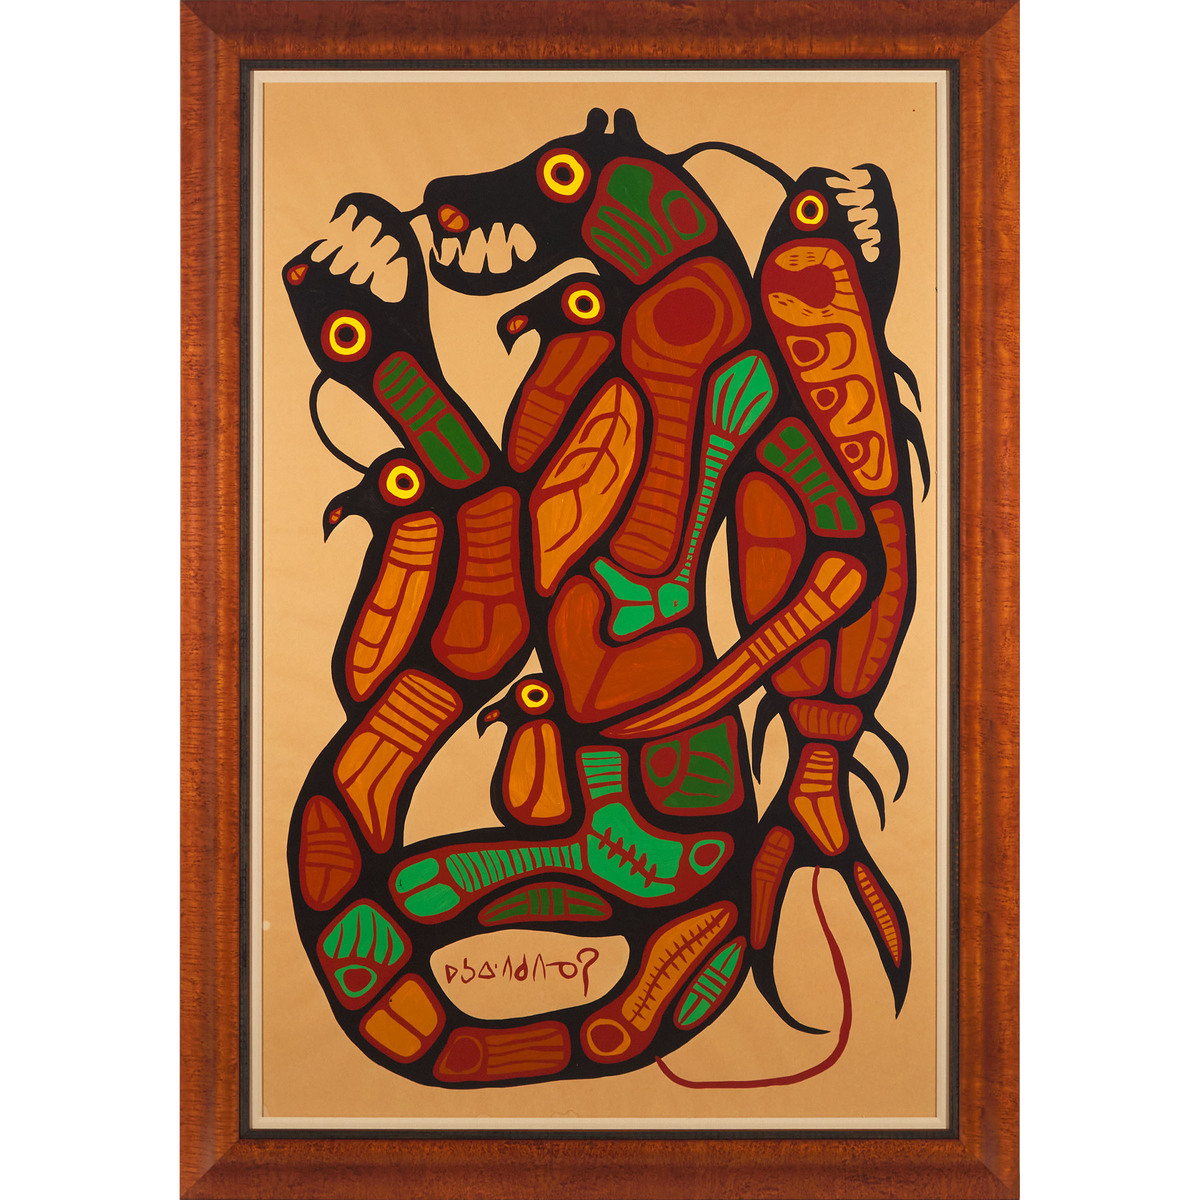 Norval Morrisseau, RCA (1931-2007), NATURE'S BALANCE, 1975, 73 x 48 in — 185.4 x 121.9 cm - Image 2 of 5